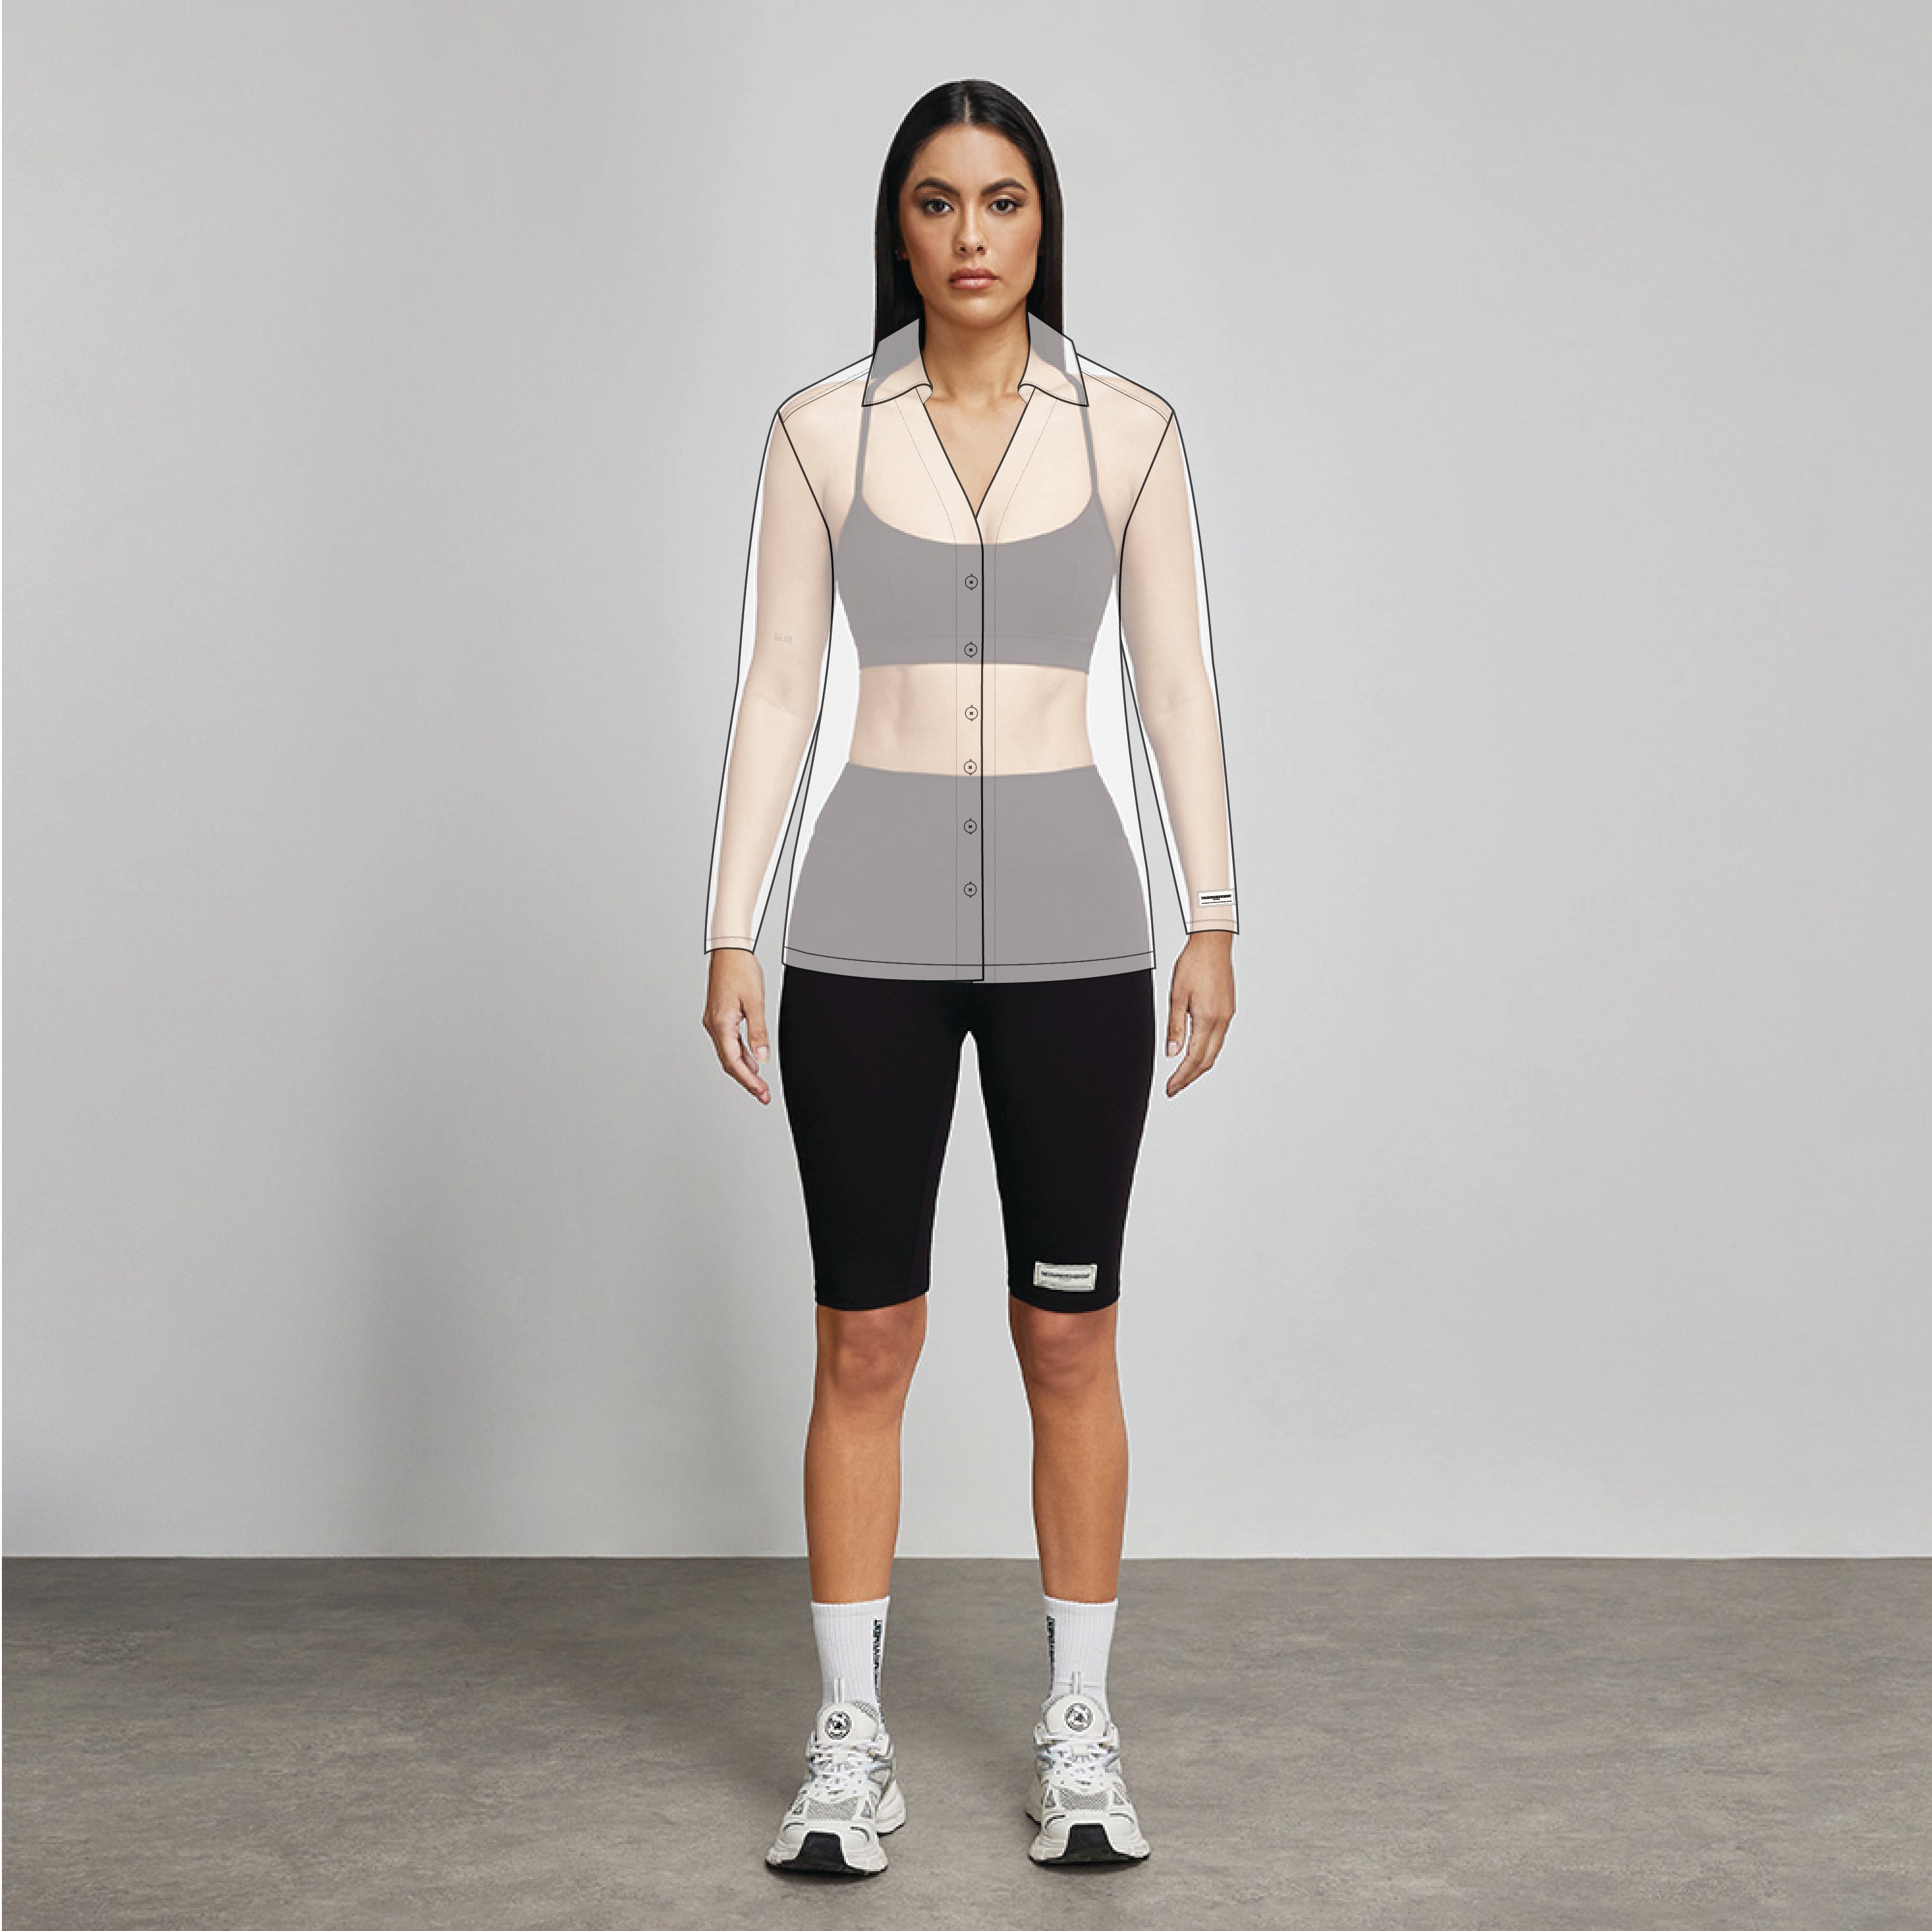 Giving Softskin100© & I Movement The – Long-Sleeve Top Tape Crop Streetwear Active